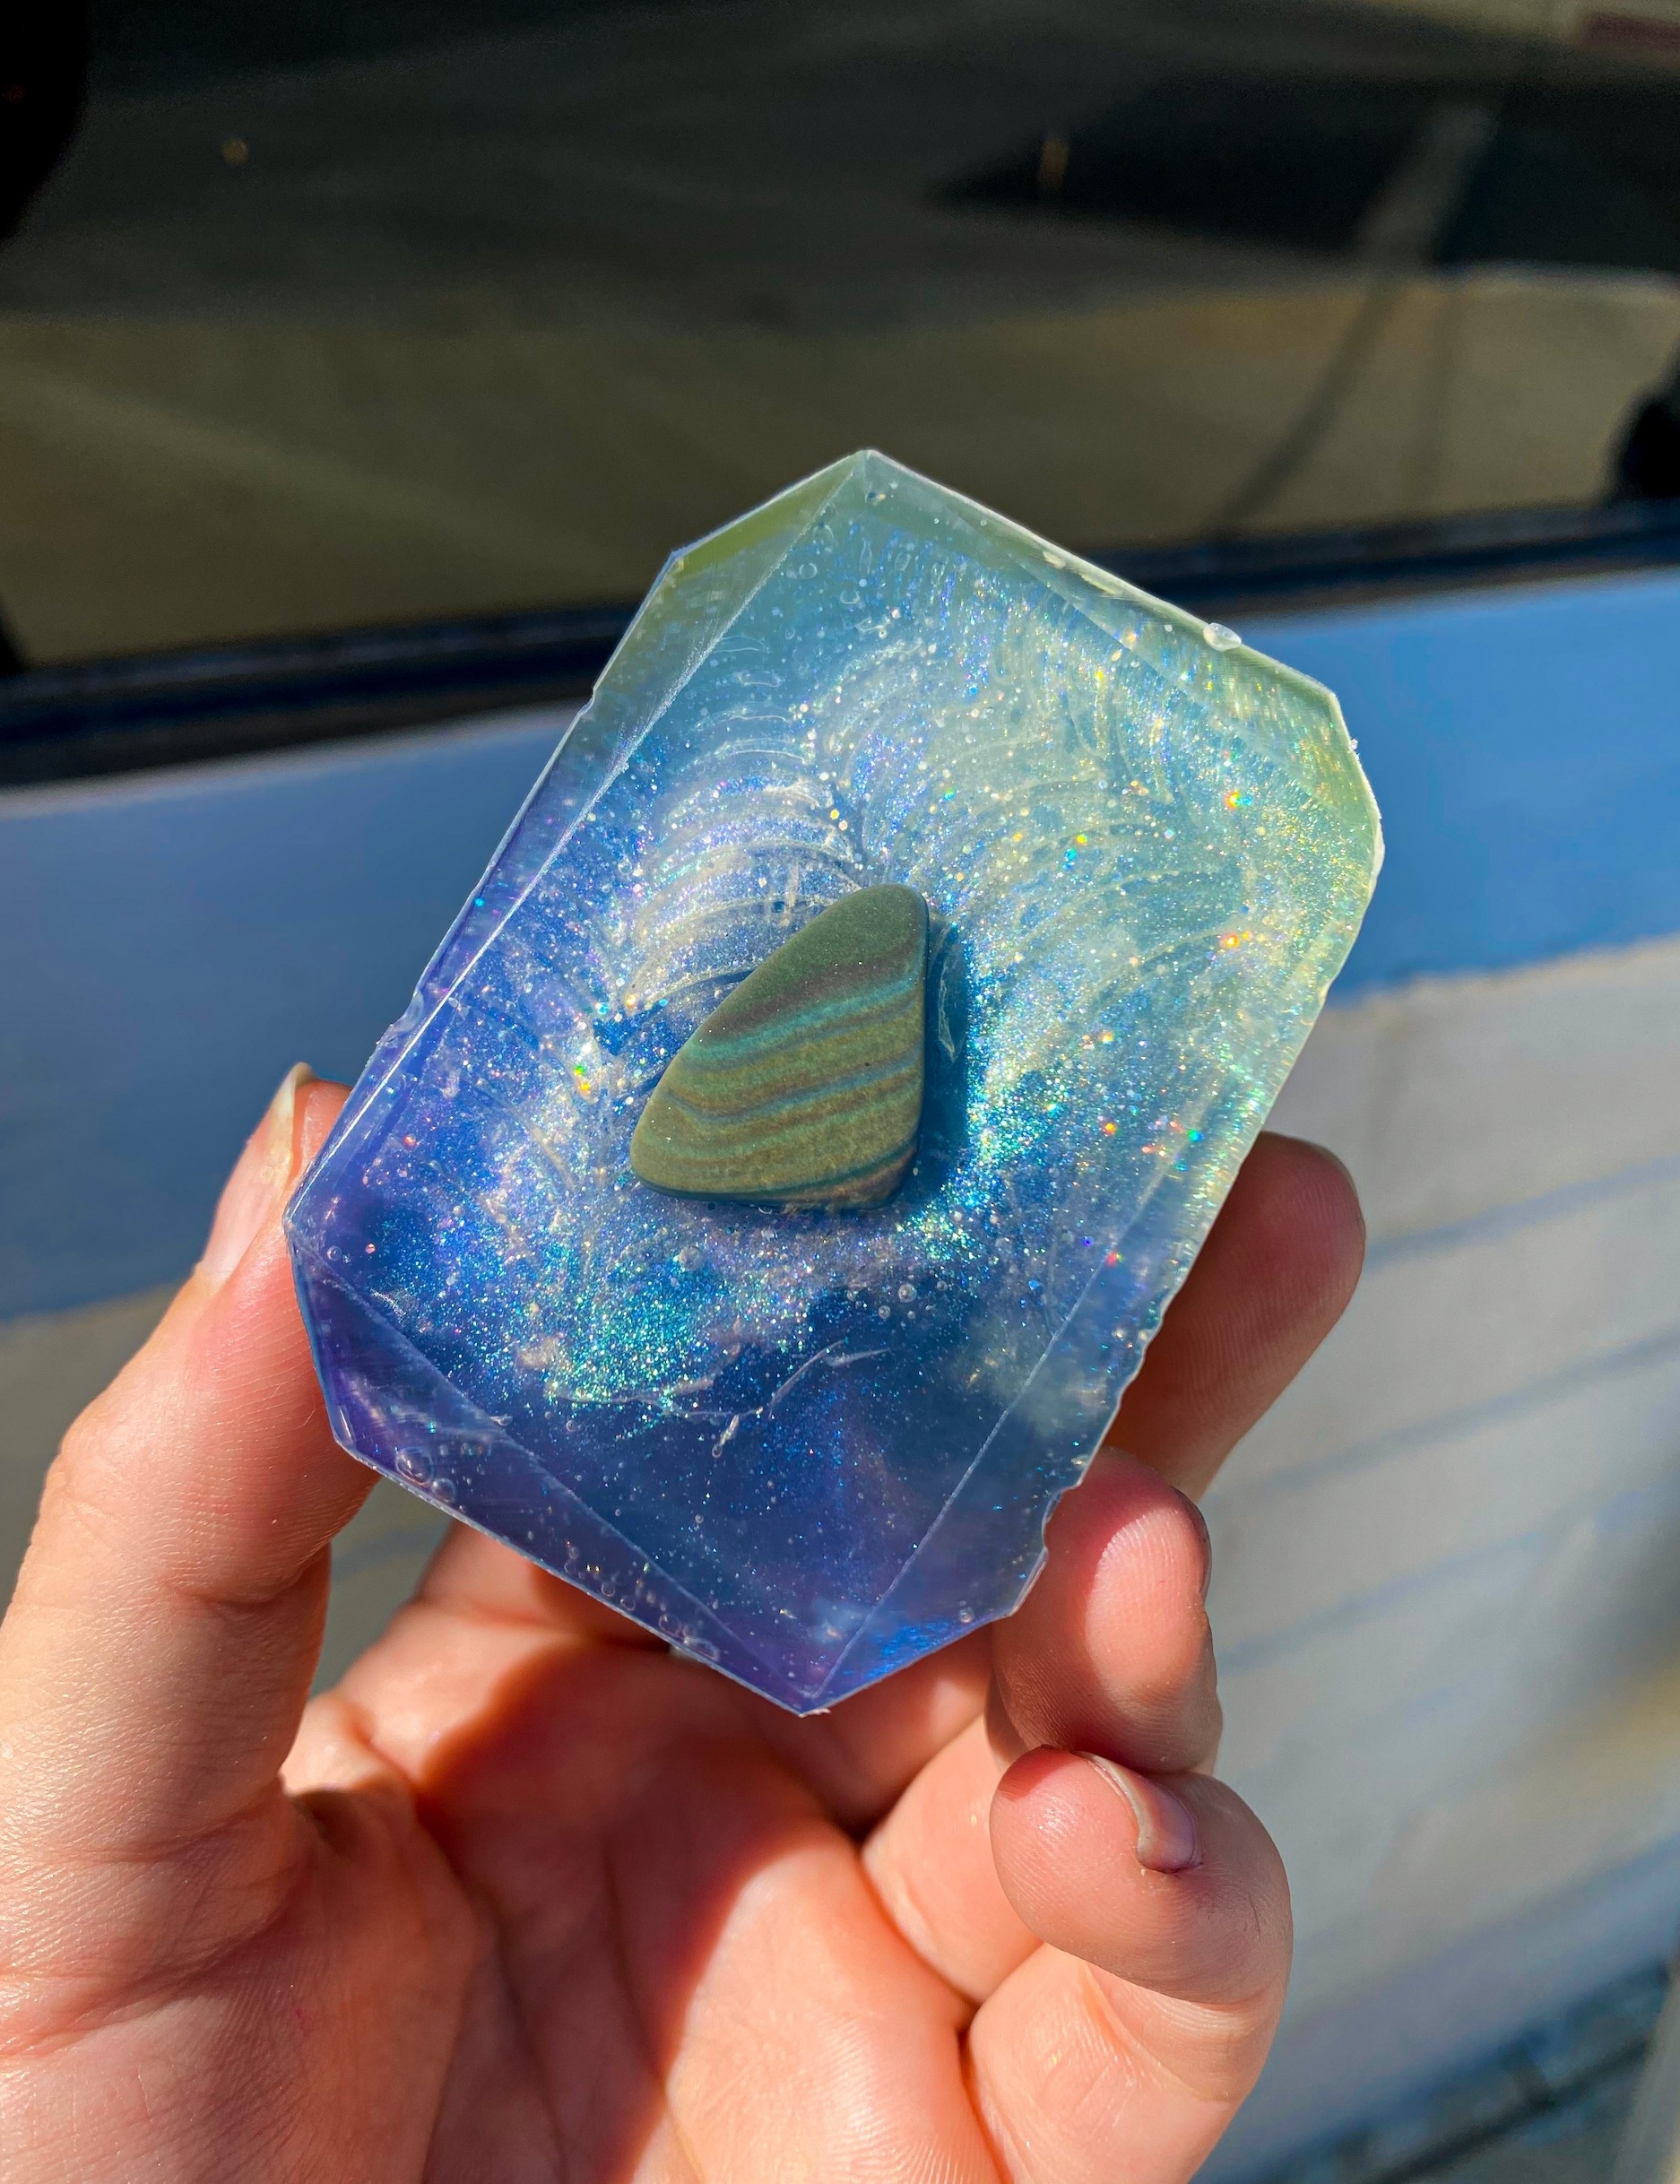 The bar of teal and blue soap with opalescent glitter, plus the Rainbow Obsidian crystal in the center